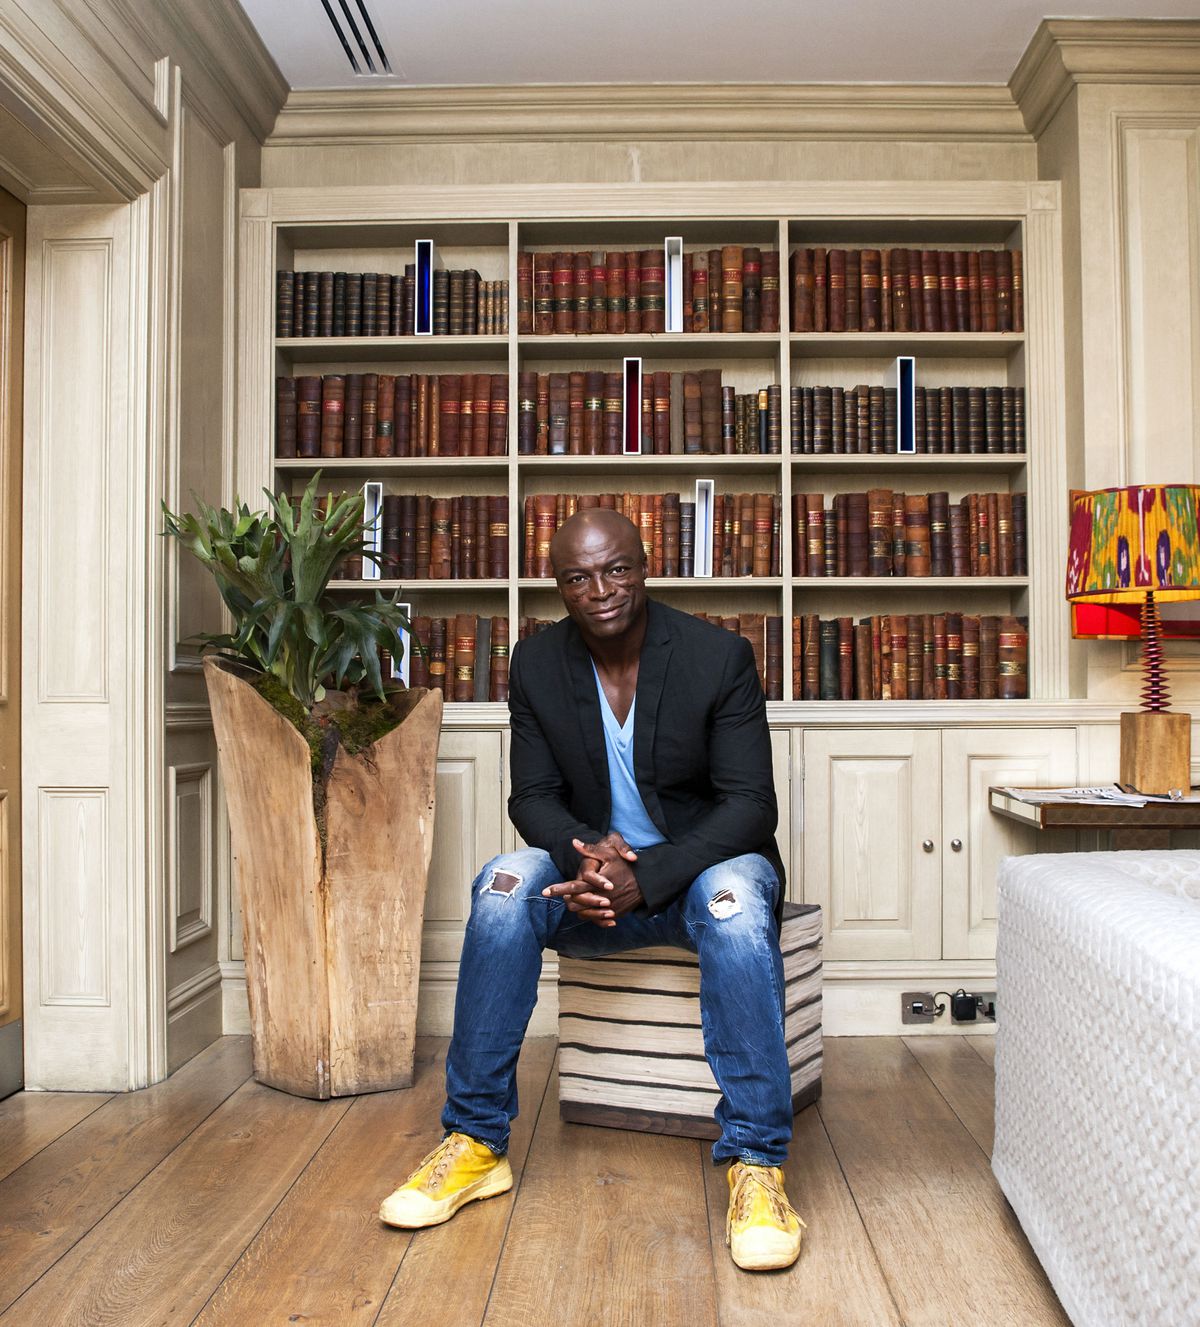 Seal photographed at The Soho Hotel, London. | The Times/News Syndication